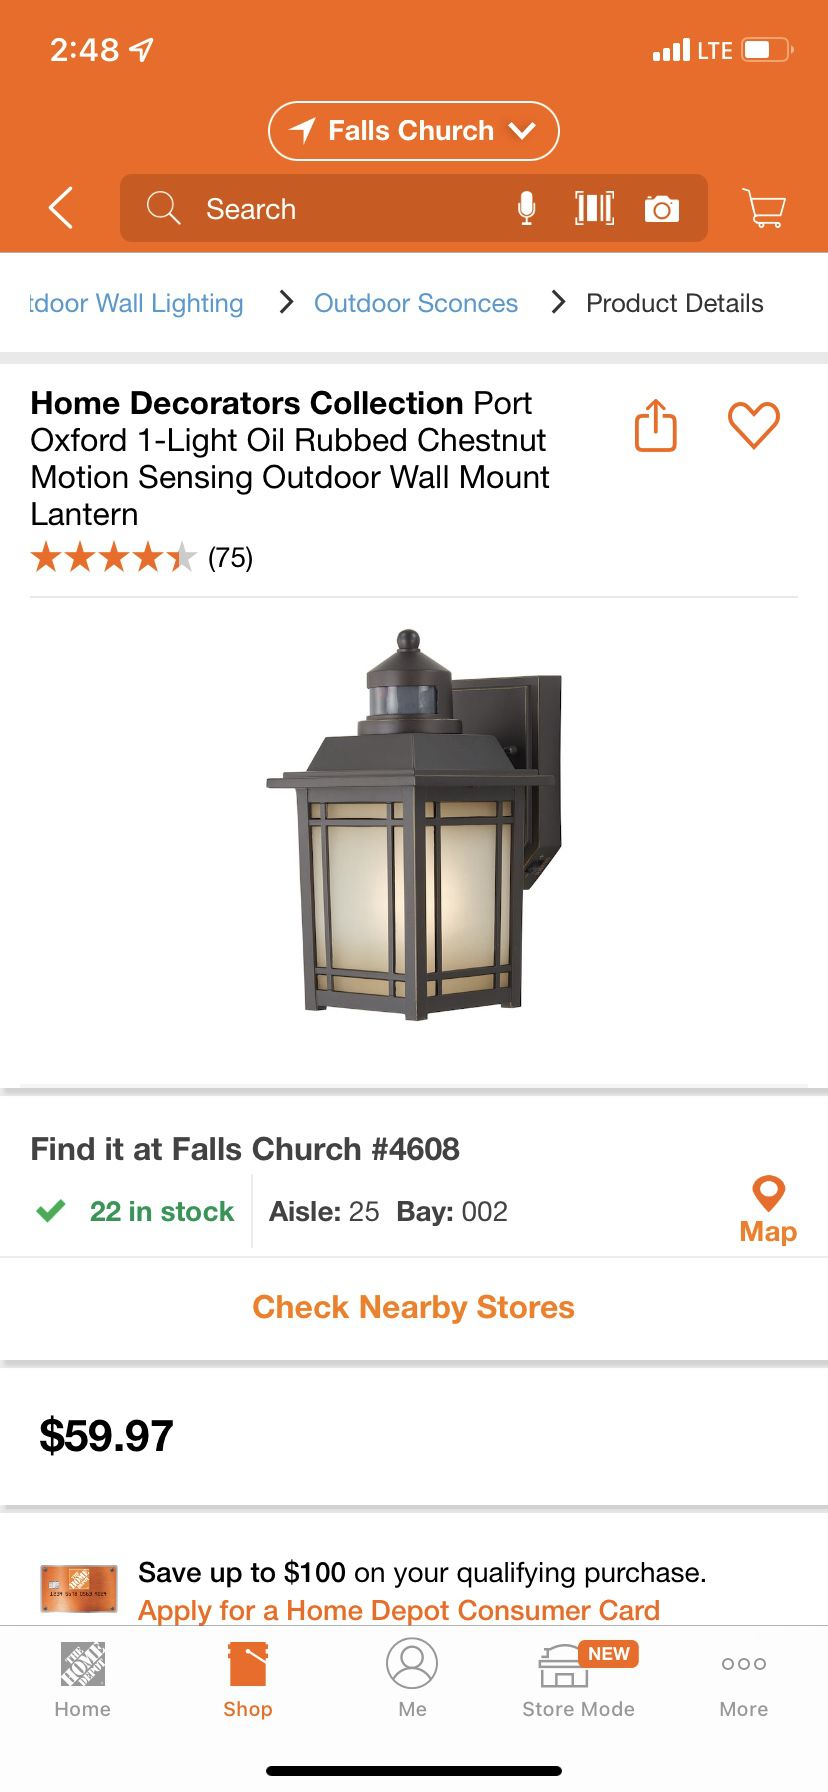 Home Decorators Collection Port Oxford 1-Light Oil Rubbed Chestnut Motion Sensing Outdoor Wall Mount Lantern